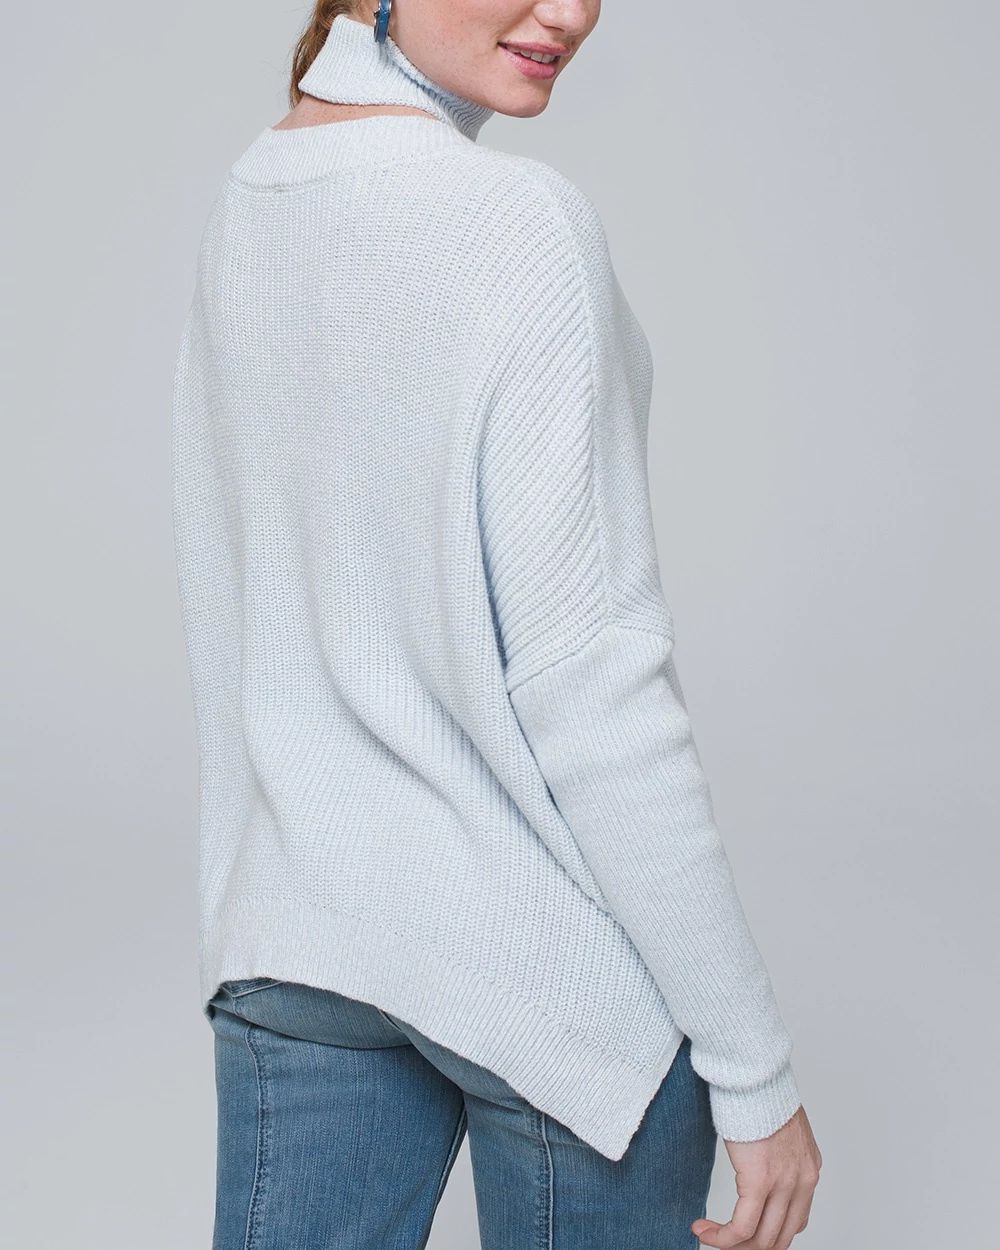 Petite Pullover Sweater with Removable Choker click to view larger image.